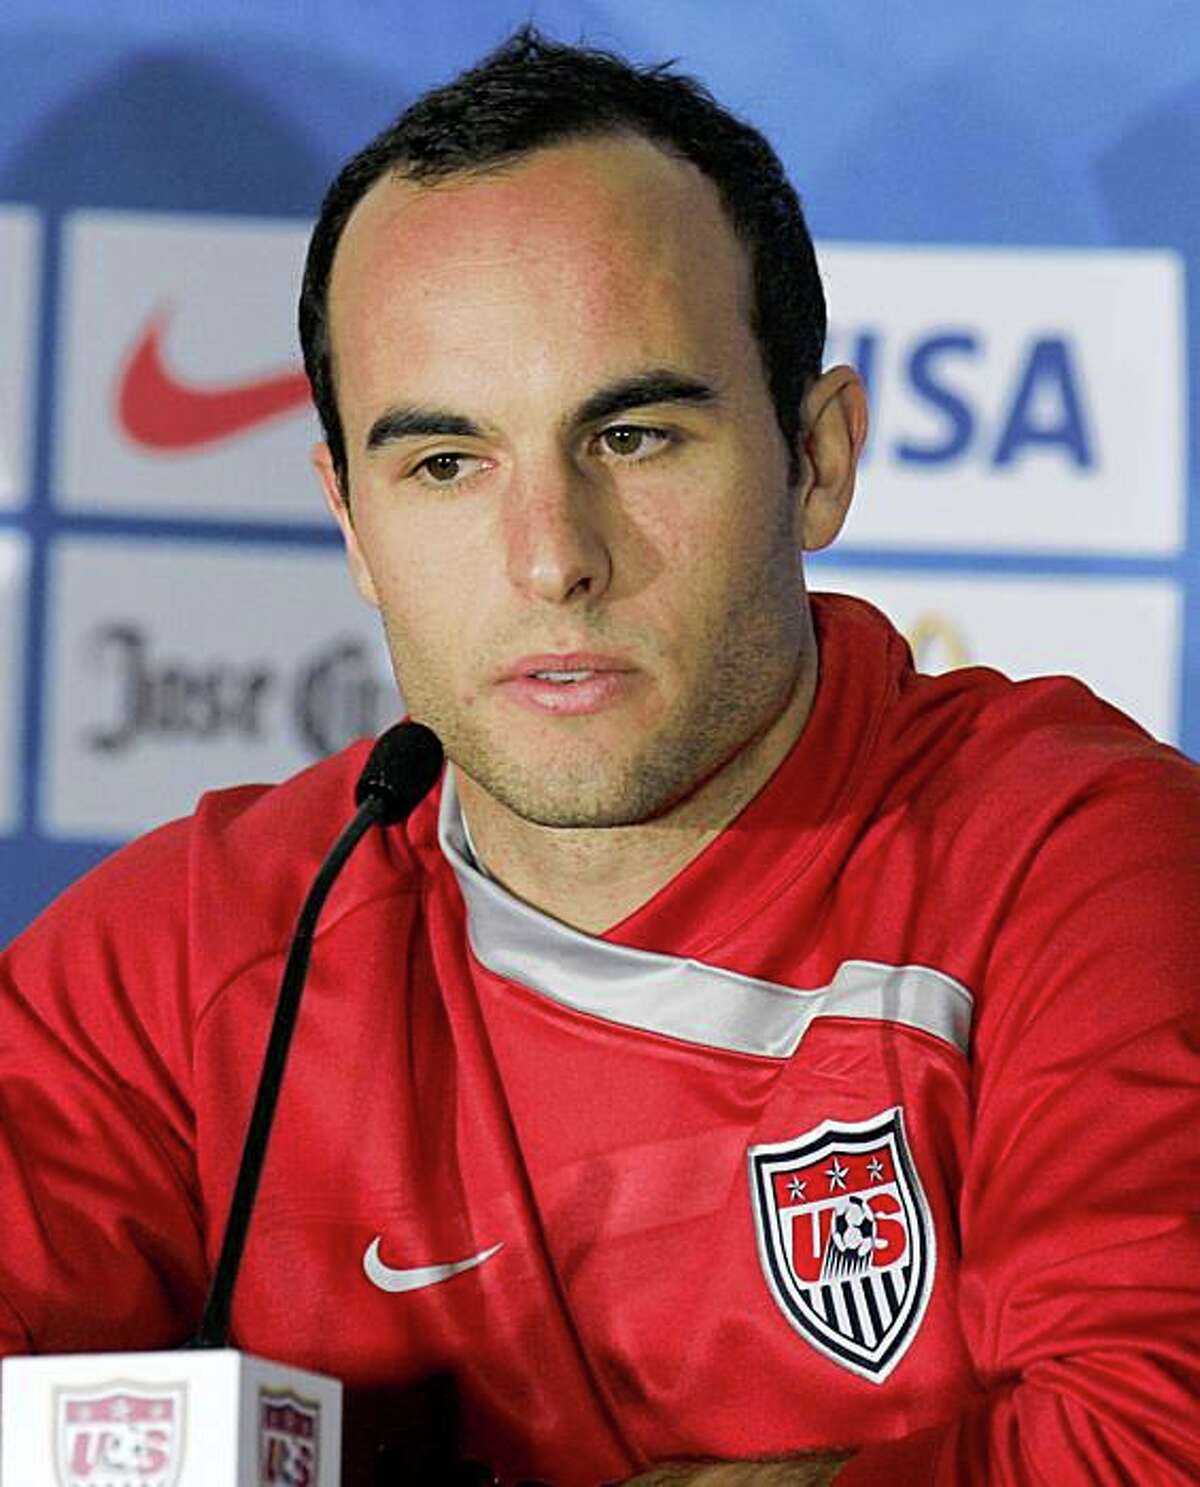 -- FILE -- In this Feb. 10, 2009, file photo, U.S. national soccer team member Landon Donovan answers questions during a news conference at Crew Stadium in Columbus, Ohio. Donovan has tested positive for swine flu, although the team is optimistic he can play Saturday night, Aug. 15, 2009. (AP Photo/Paul Vernon,file)